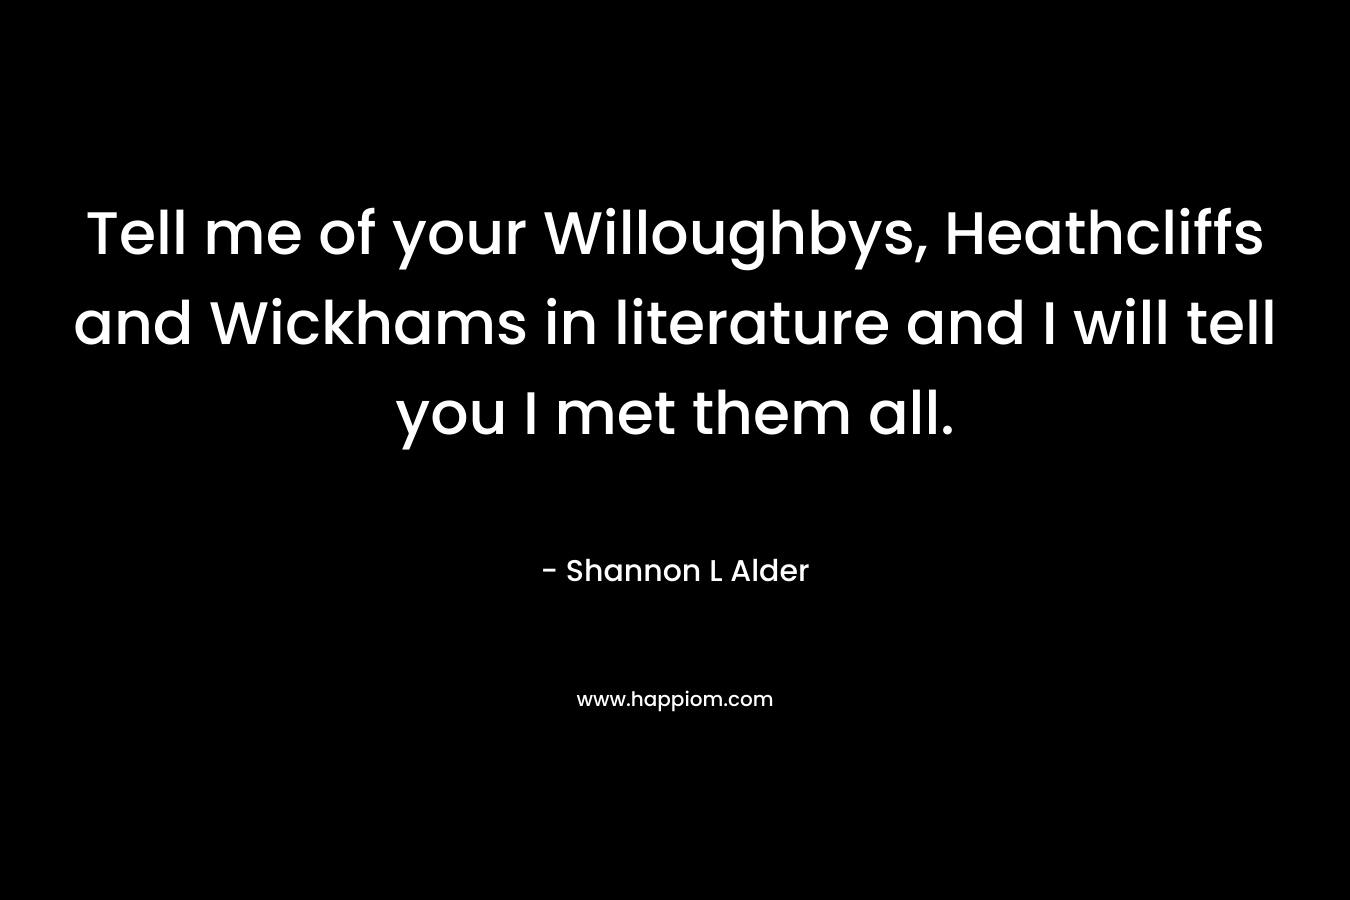 Tell me of your Willoughbys, Heathcliffs and Wickhams in literature and I will tell you I met them all.